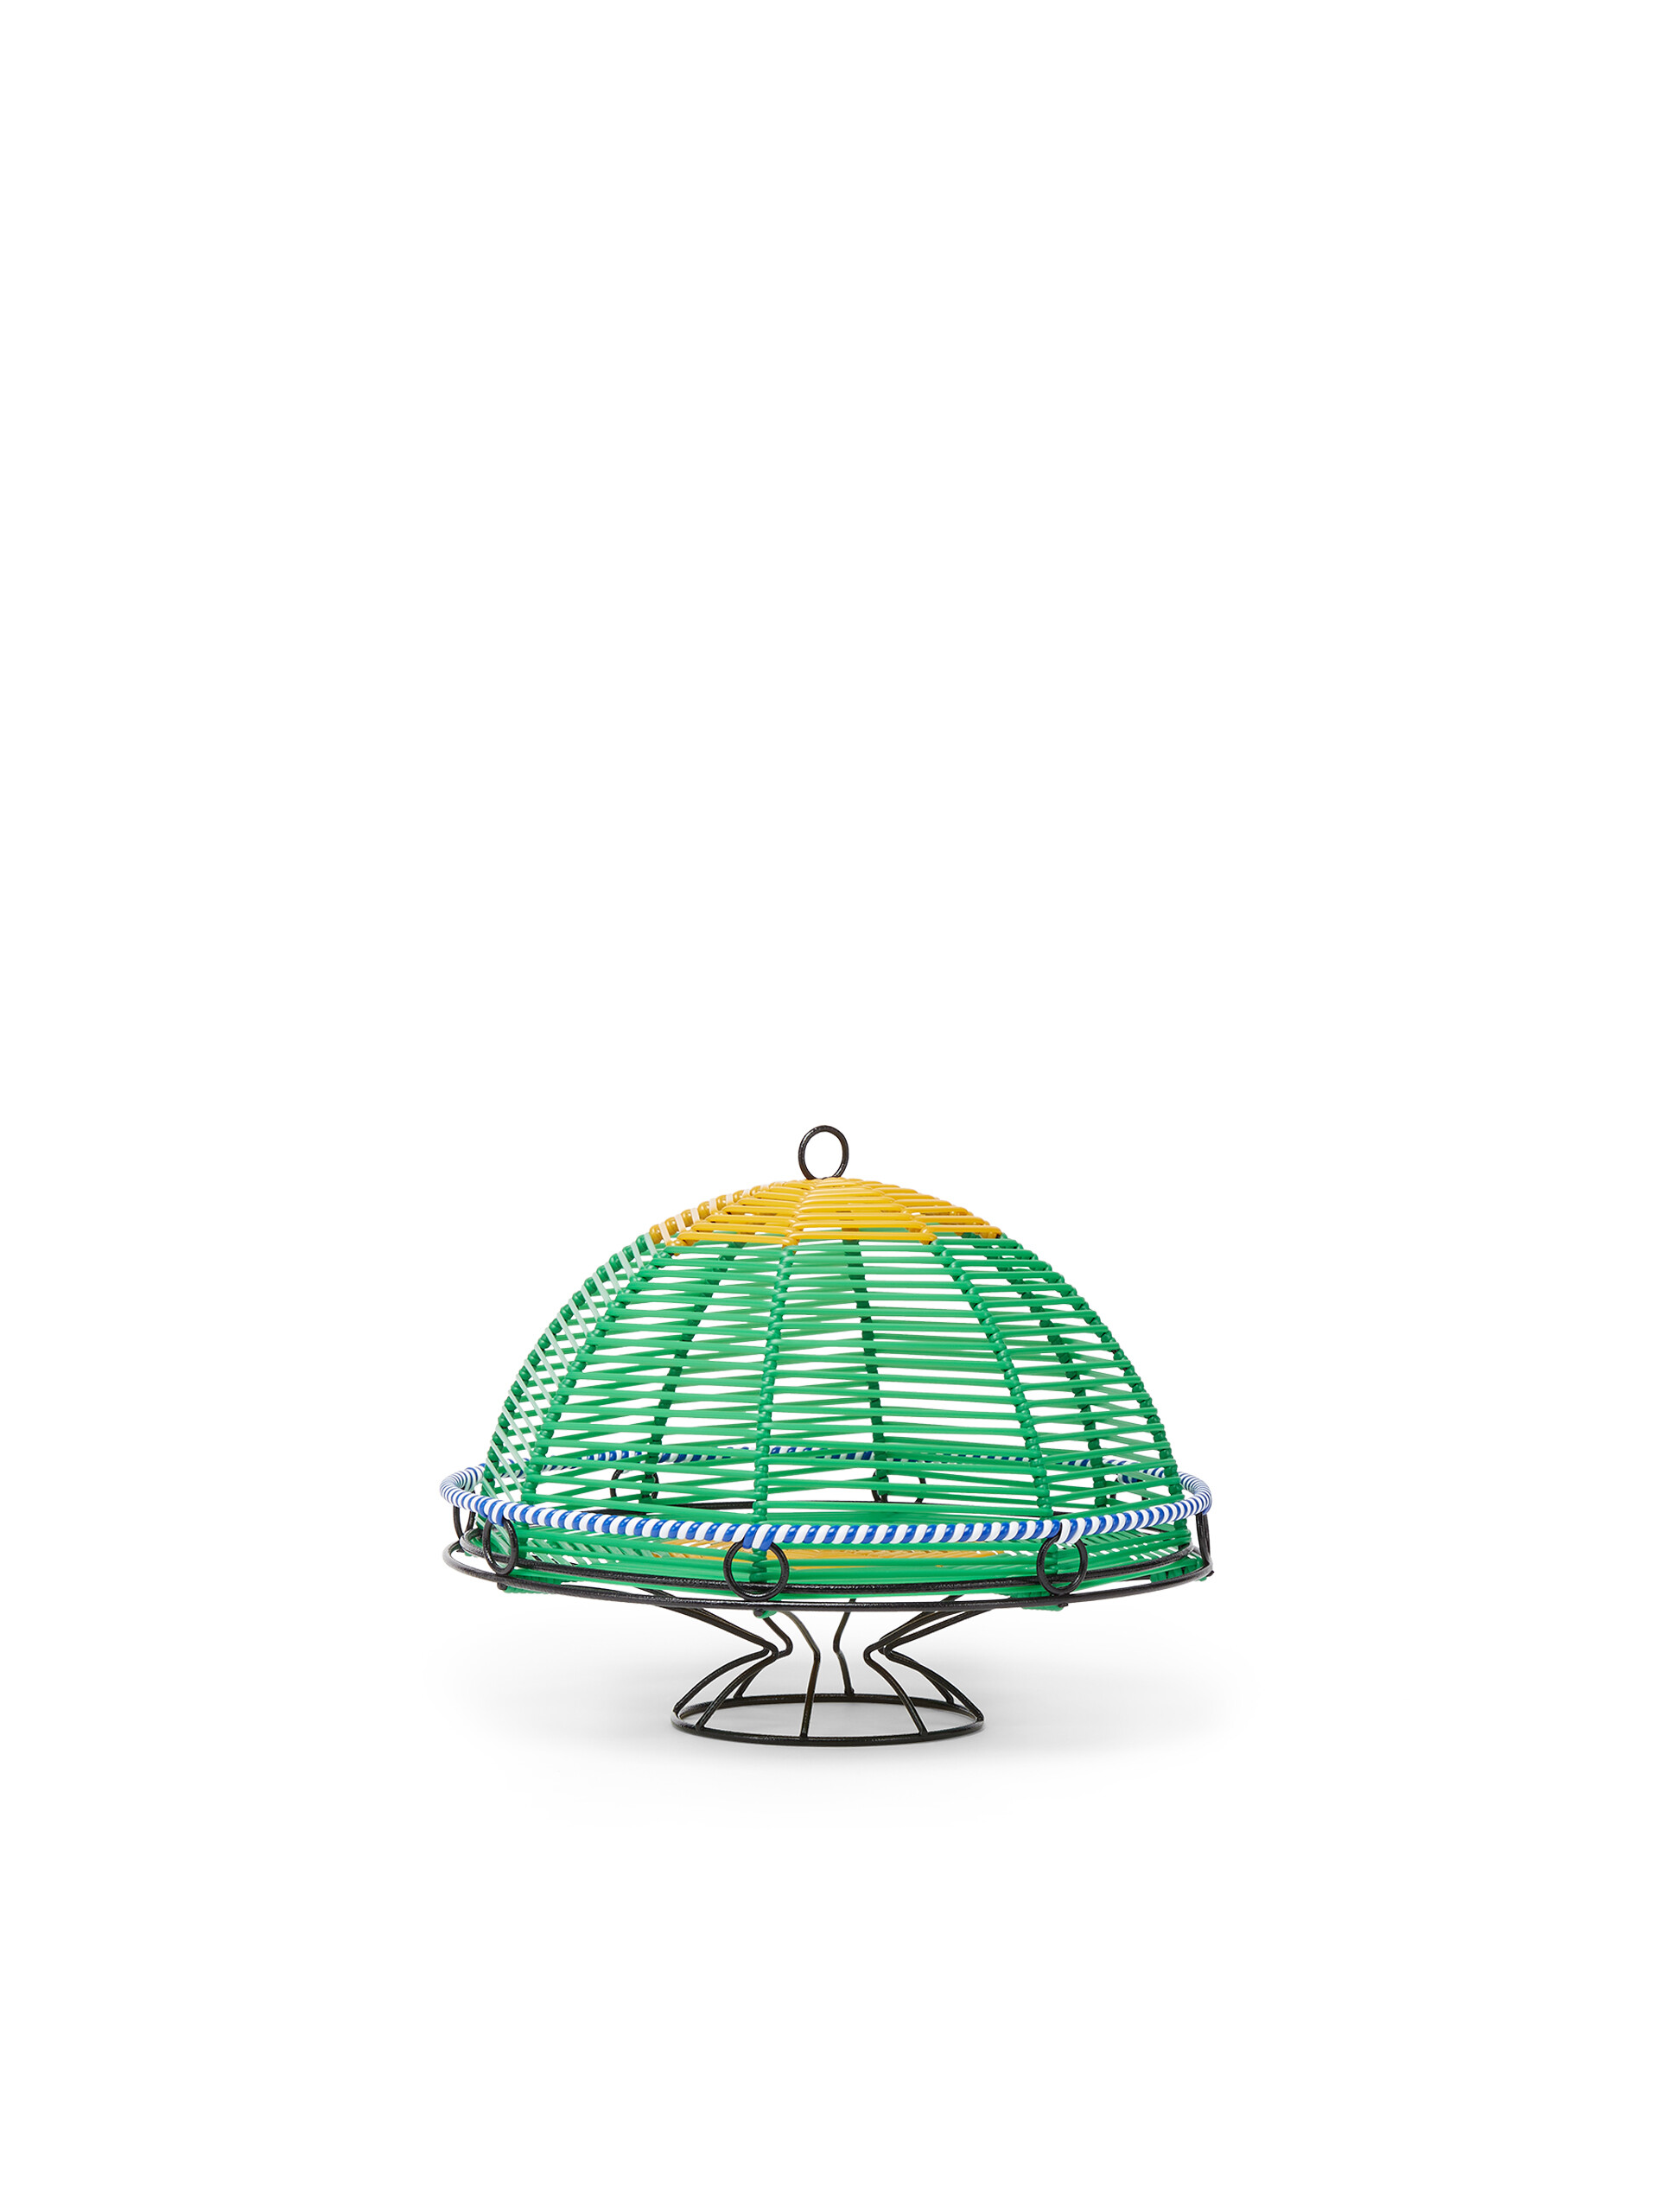 MARNI MARKET green and yellow cake stand - Accessories - Image 2